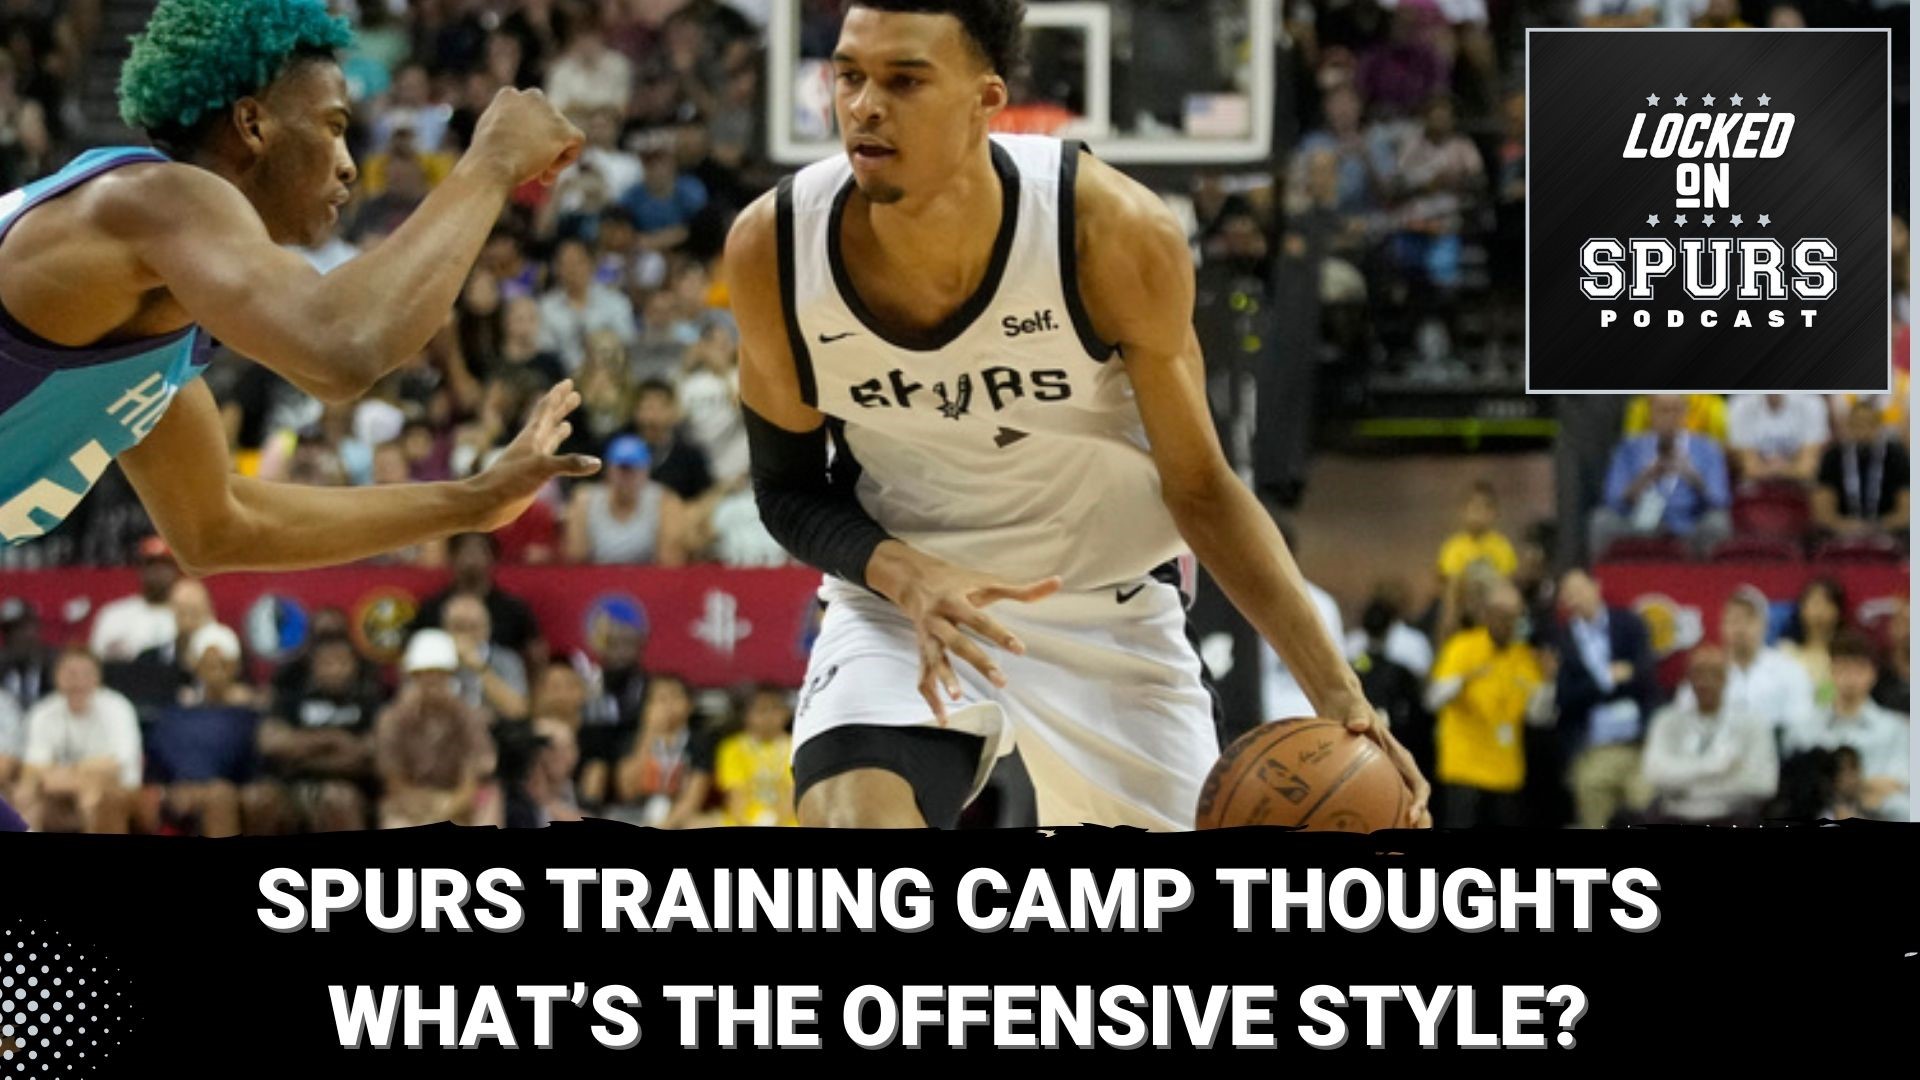 Happy Spurs training camp eve!